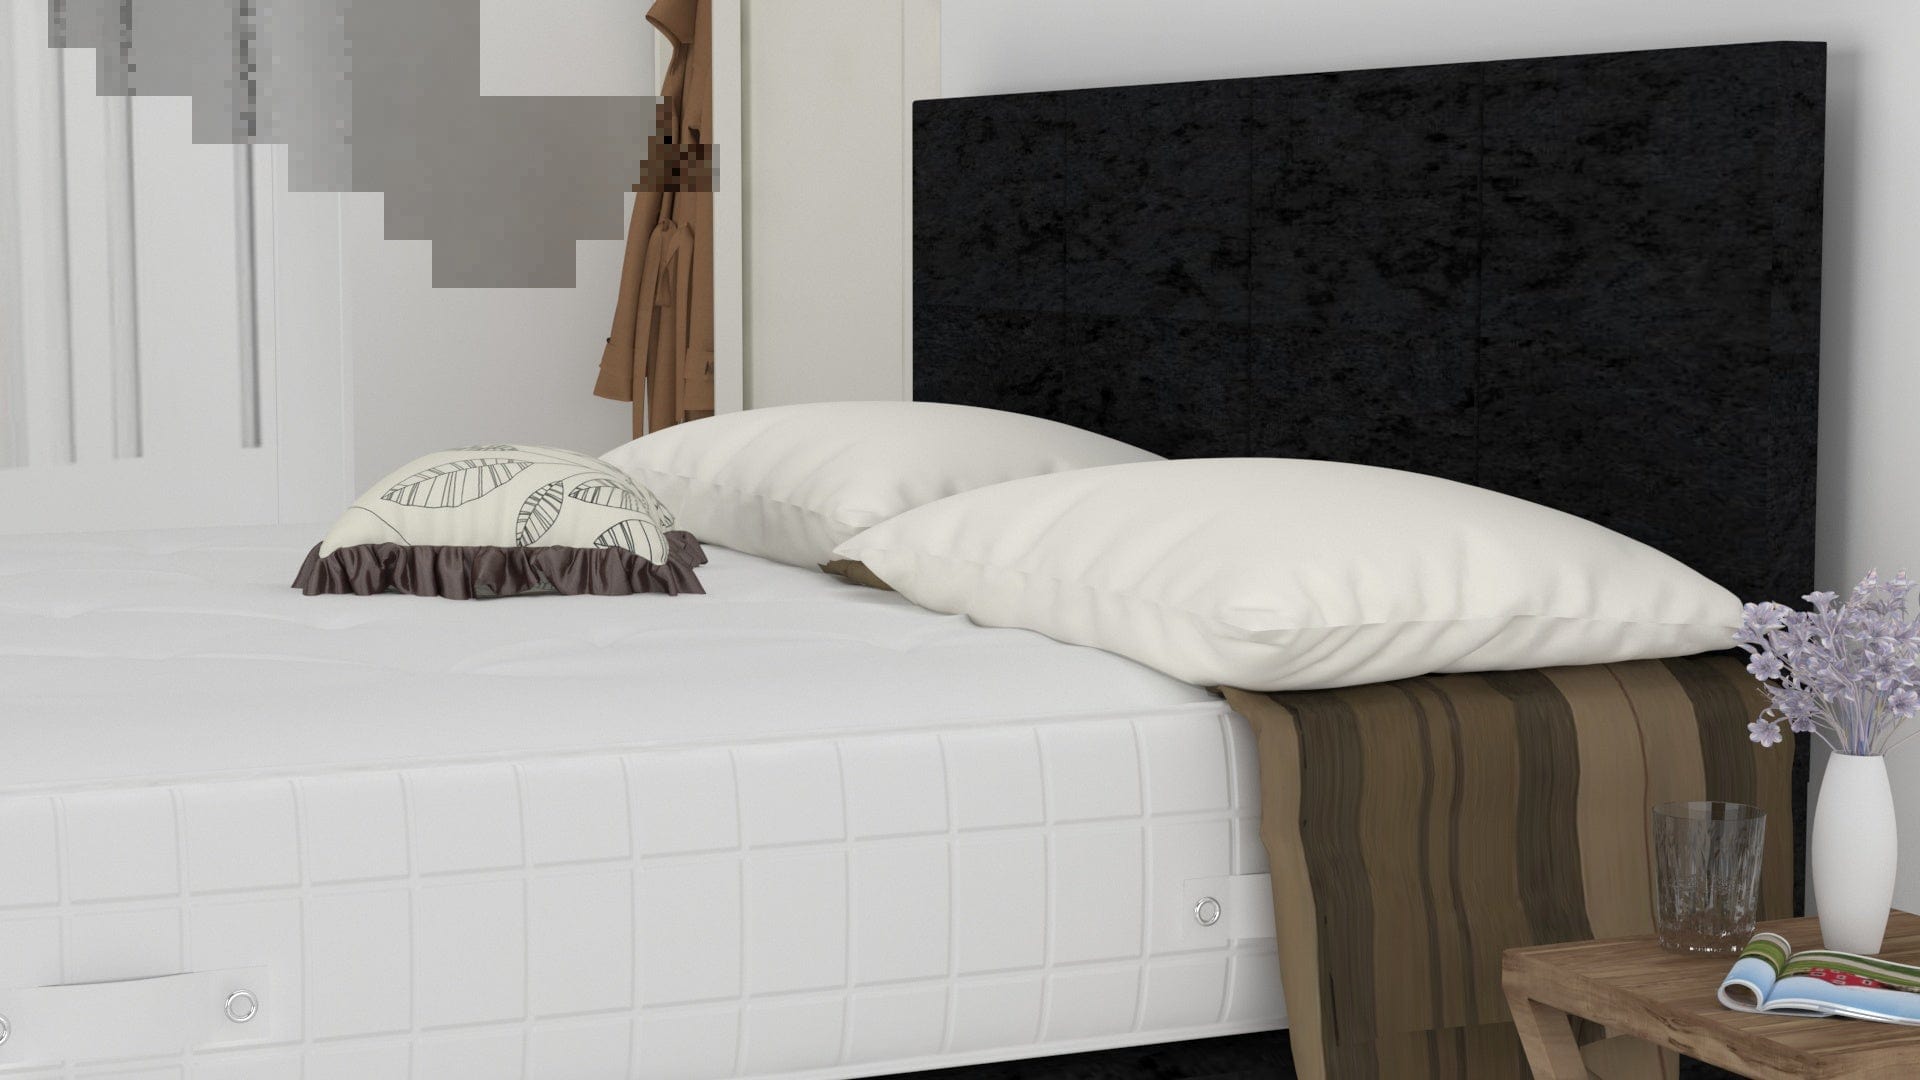 Black Crushed 3 Feet Divan Bed Set With 4 Panel Headboard (Included Feet) And Free Tinsel Top Mattress